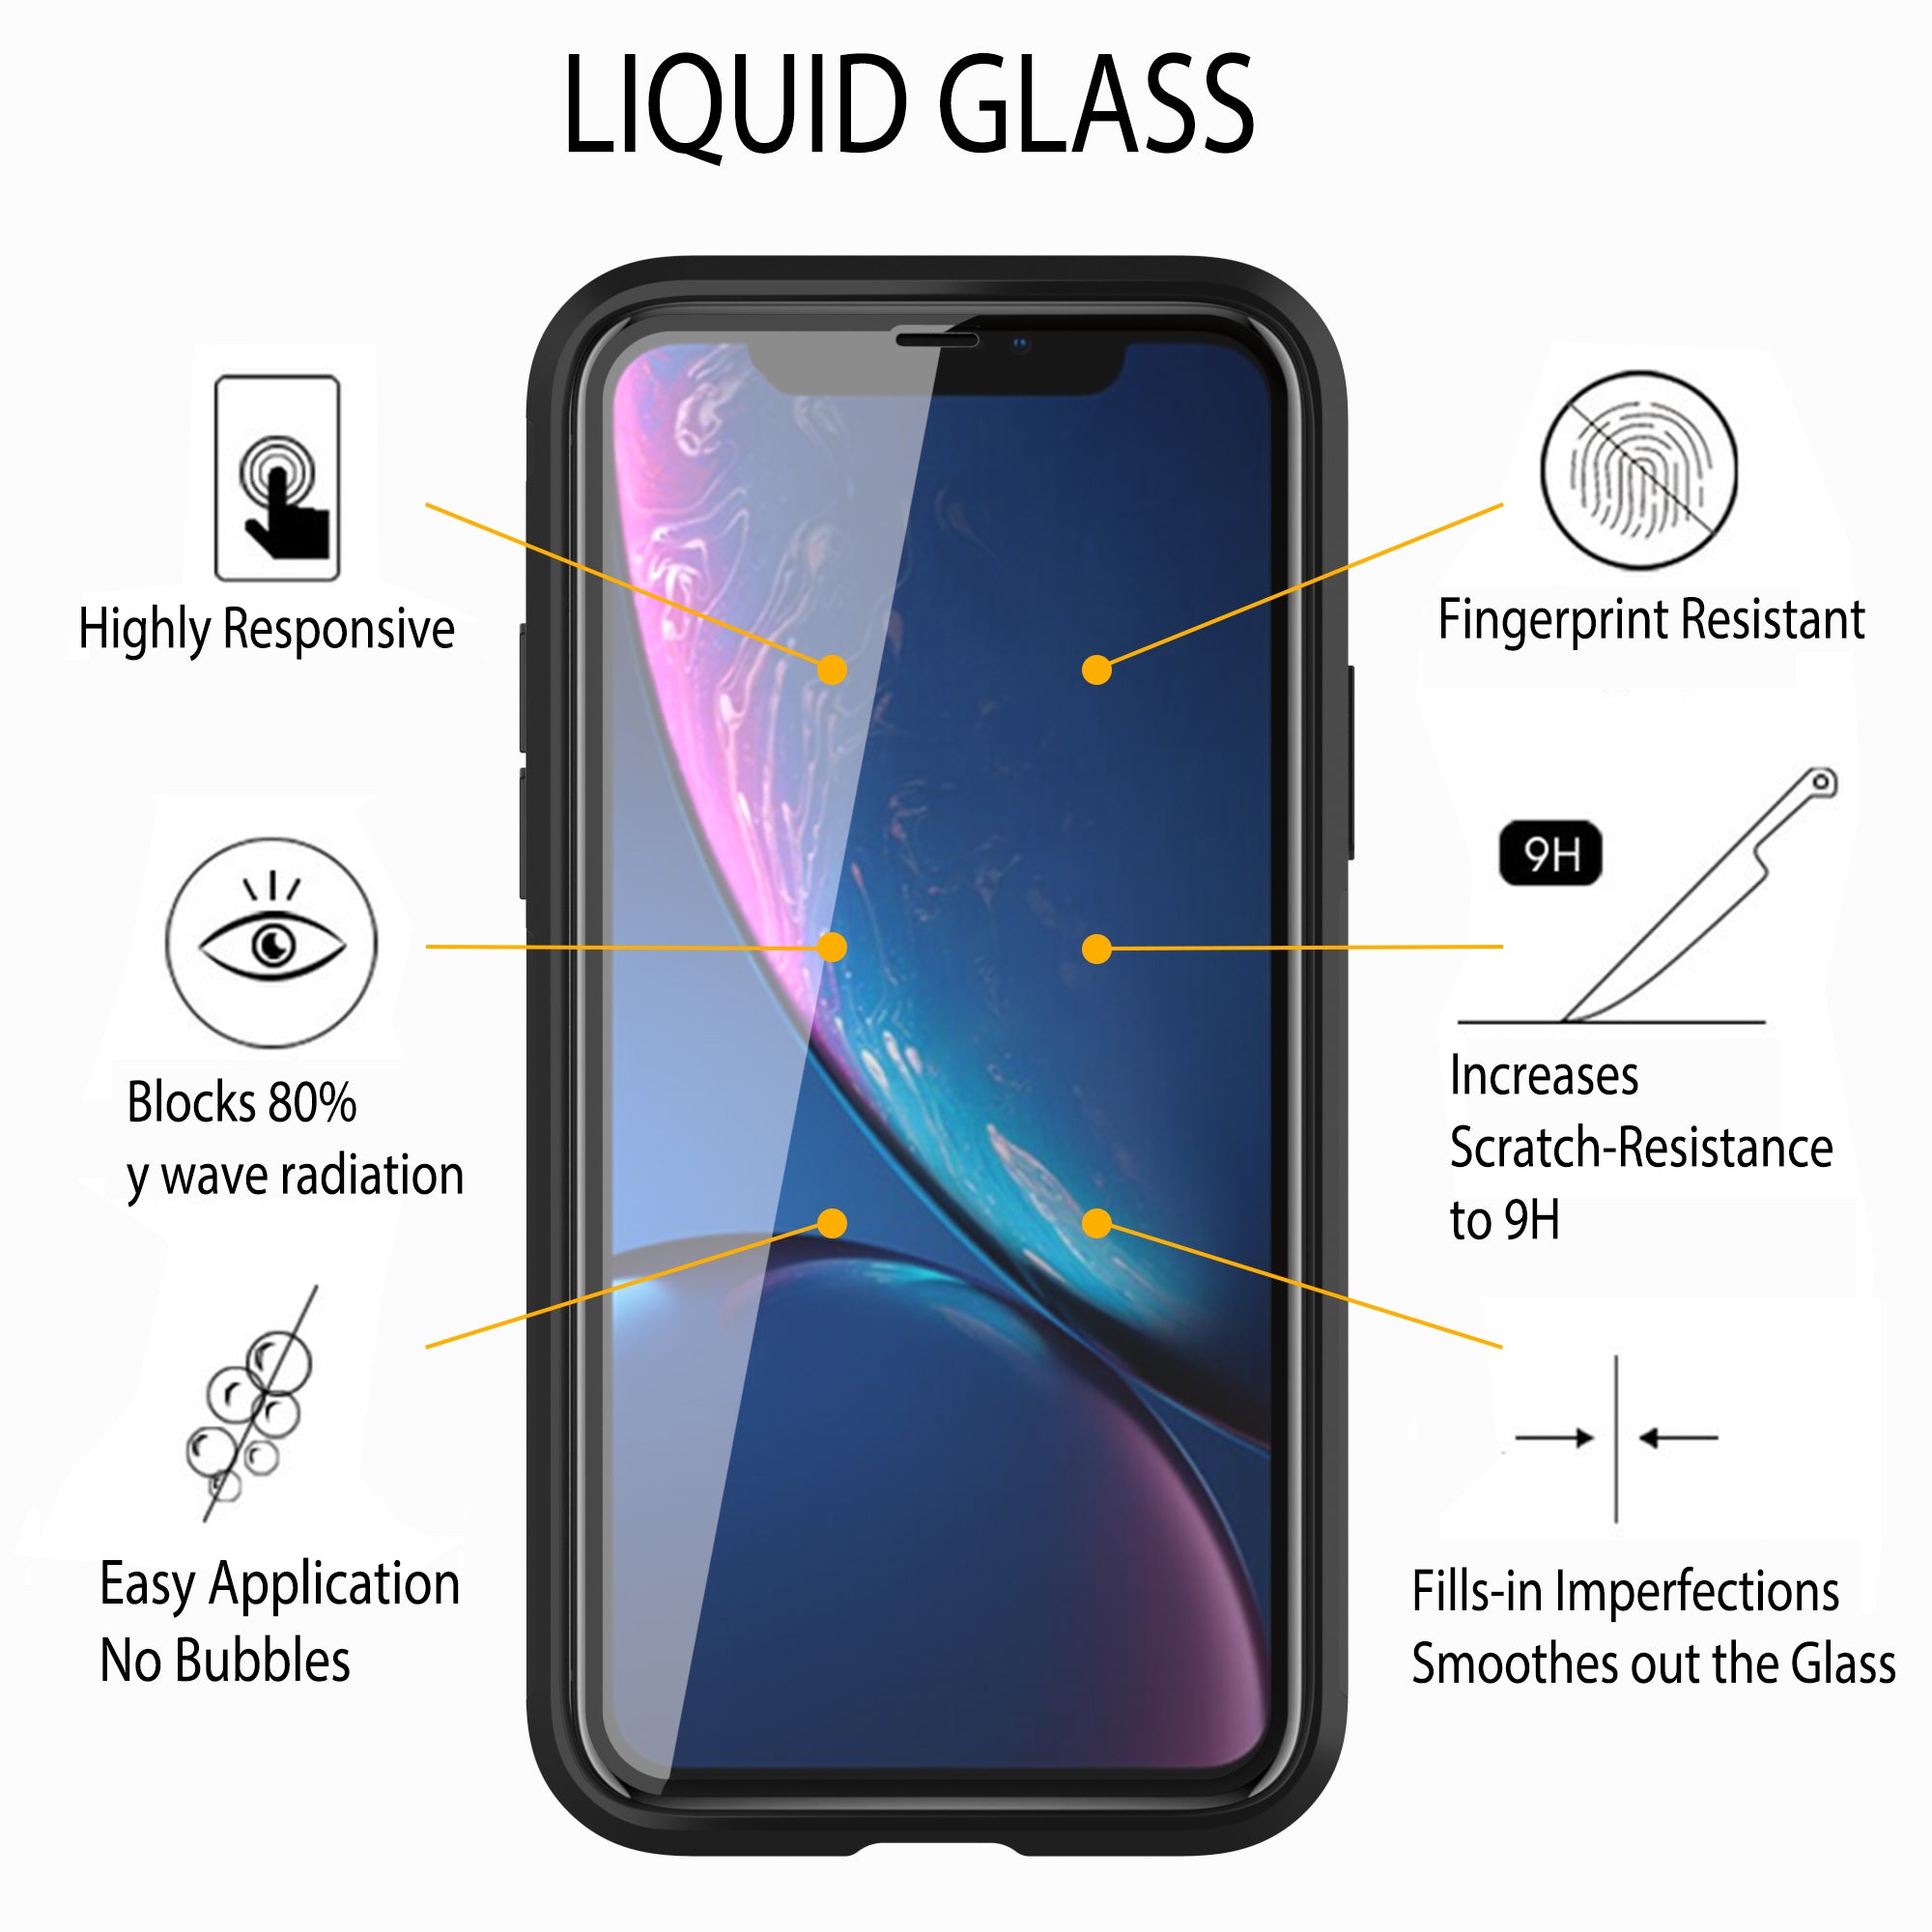 ProofTech Liquid Glass Screen Protector for All Smartphones Tablets and Watches